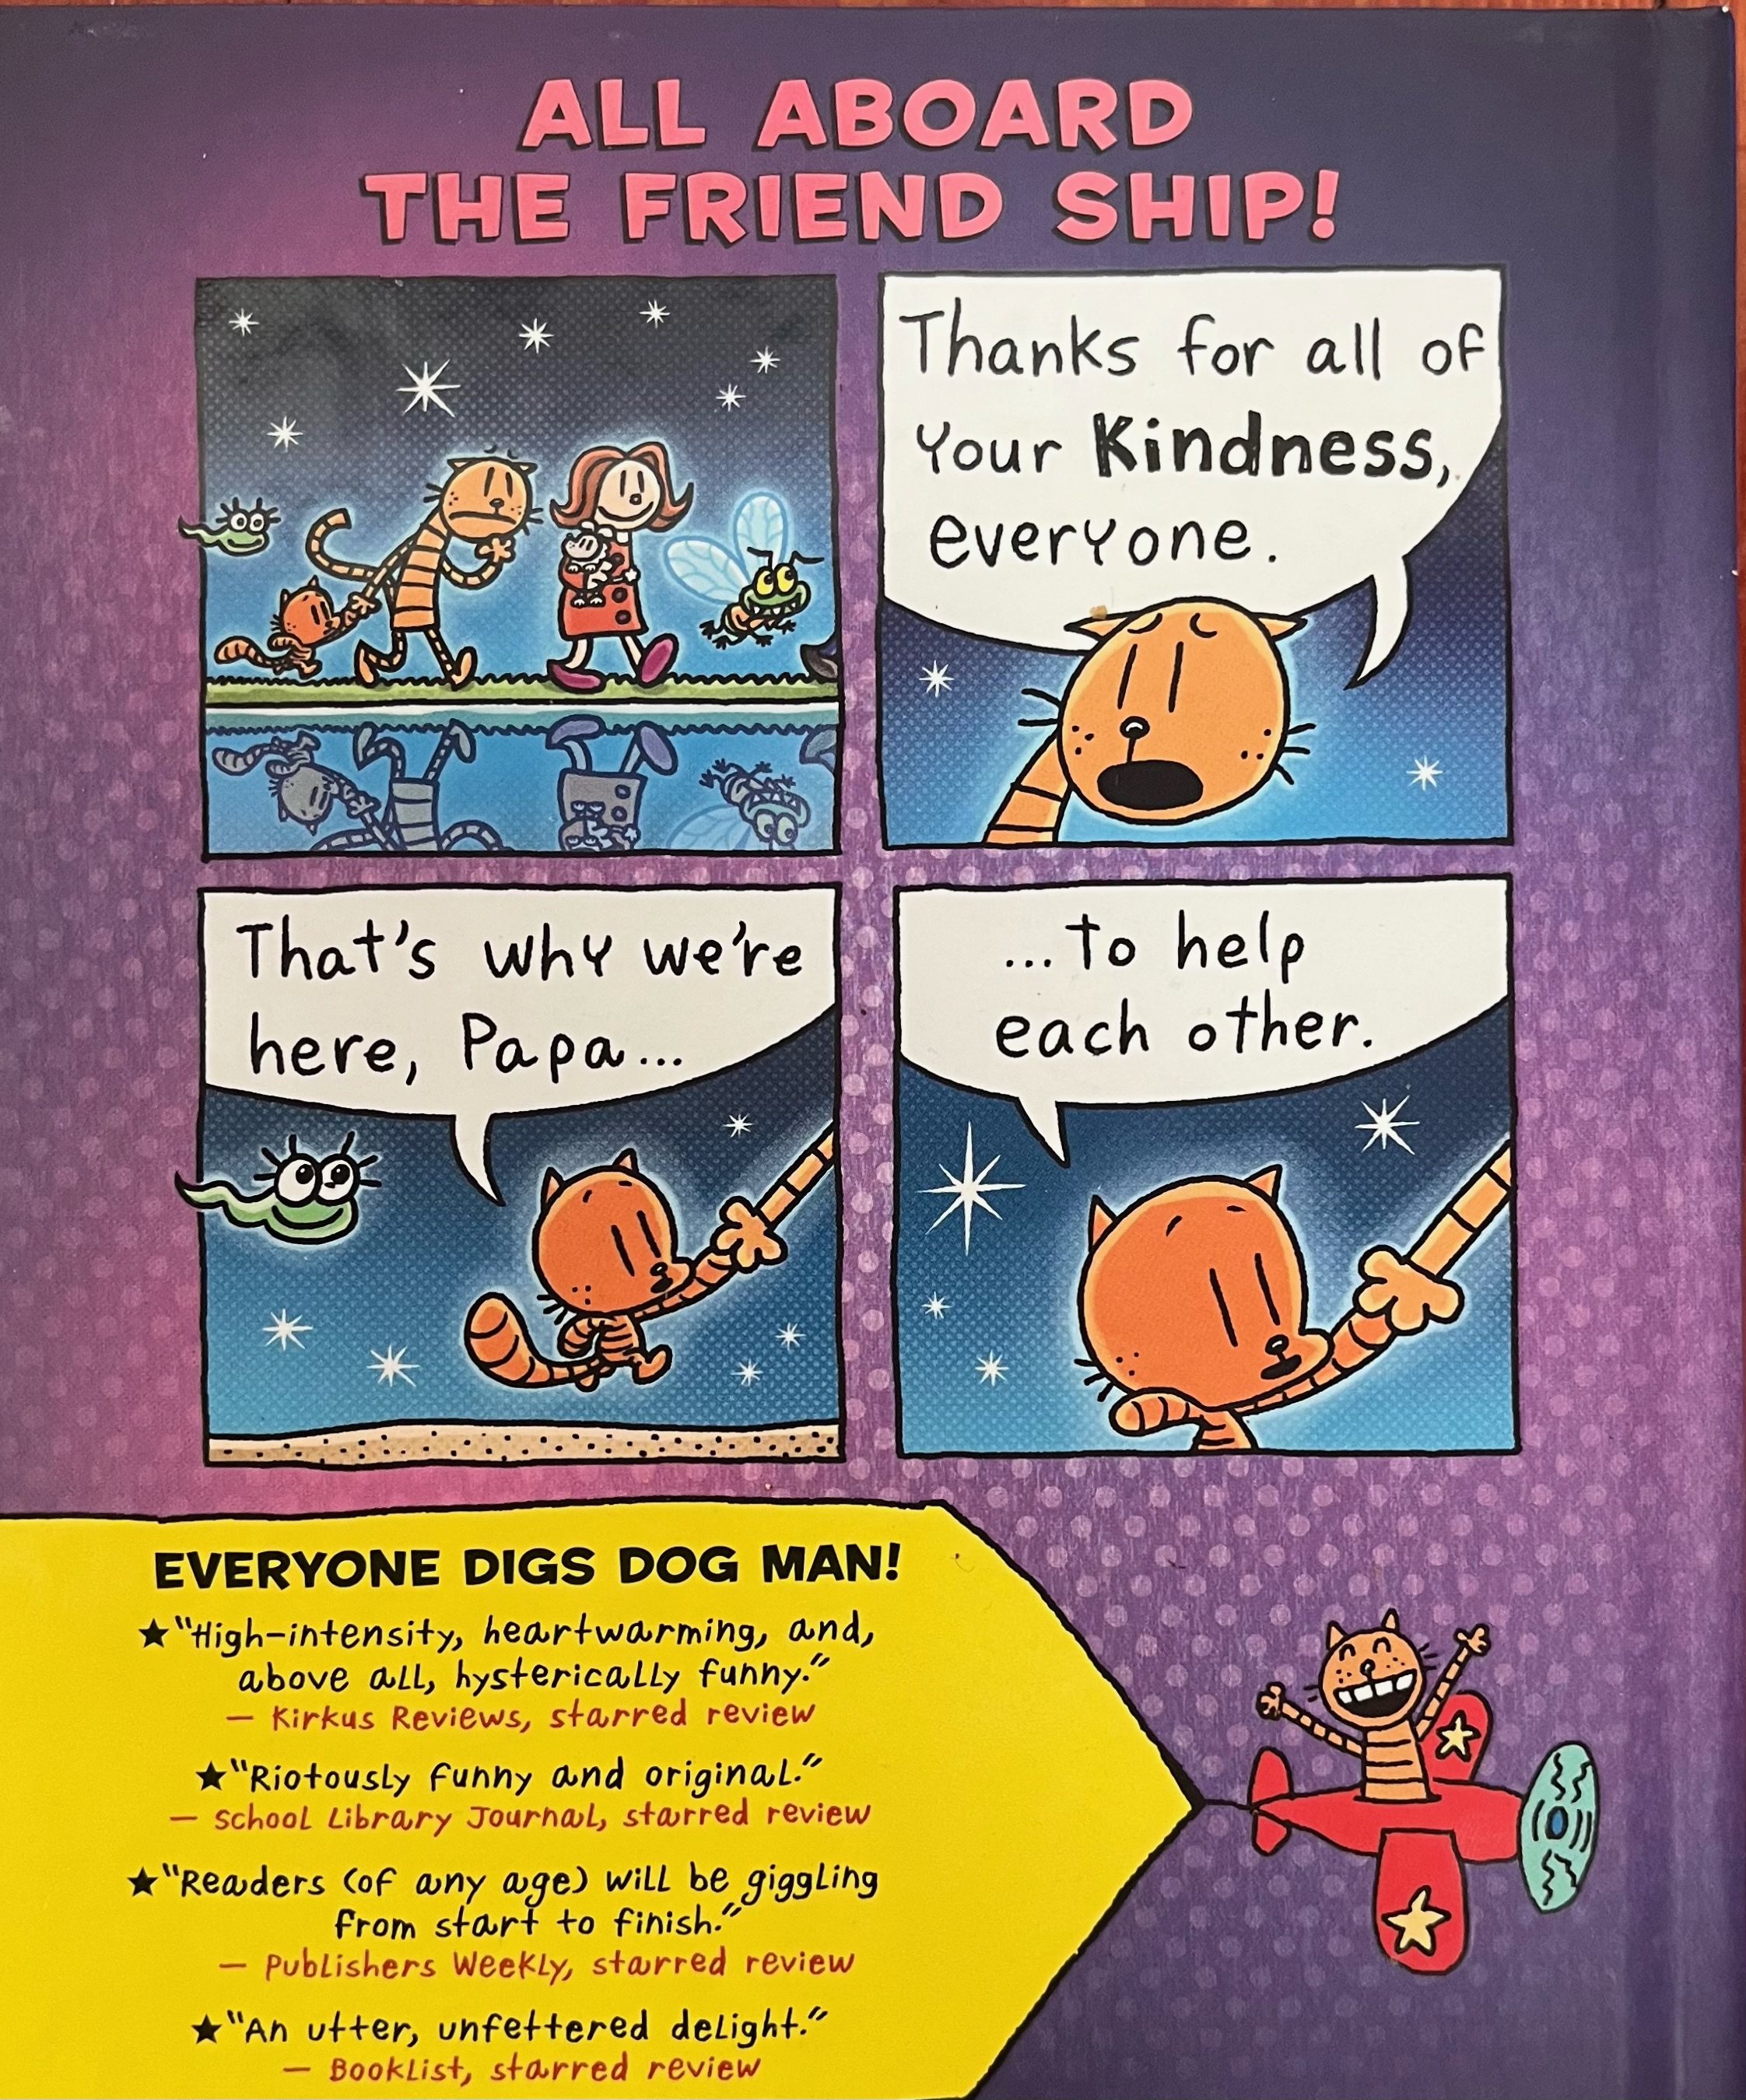 Dog Man: Twenty Thousand Fleas Under the Sea back cover of graphic novel for kids by Dav Pikey